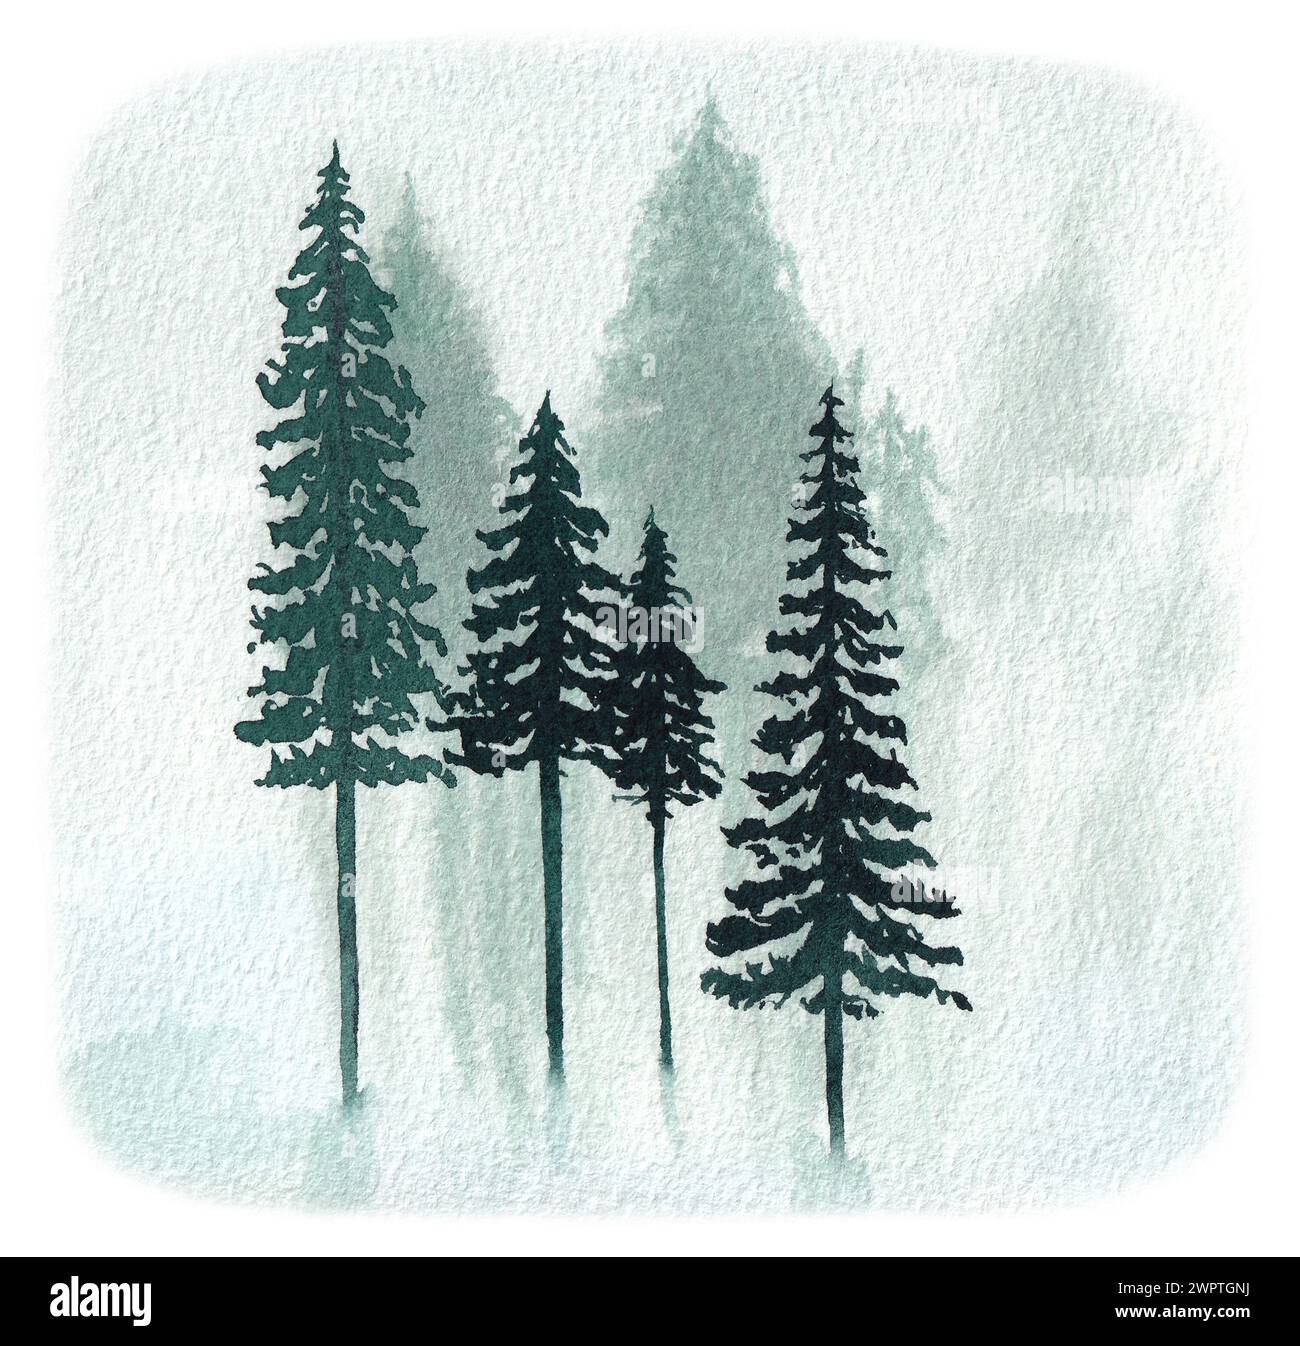 Watercolor hand drawn landscape. Silhouette of trees. Stock Photo